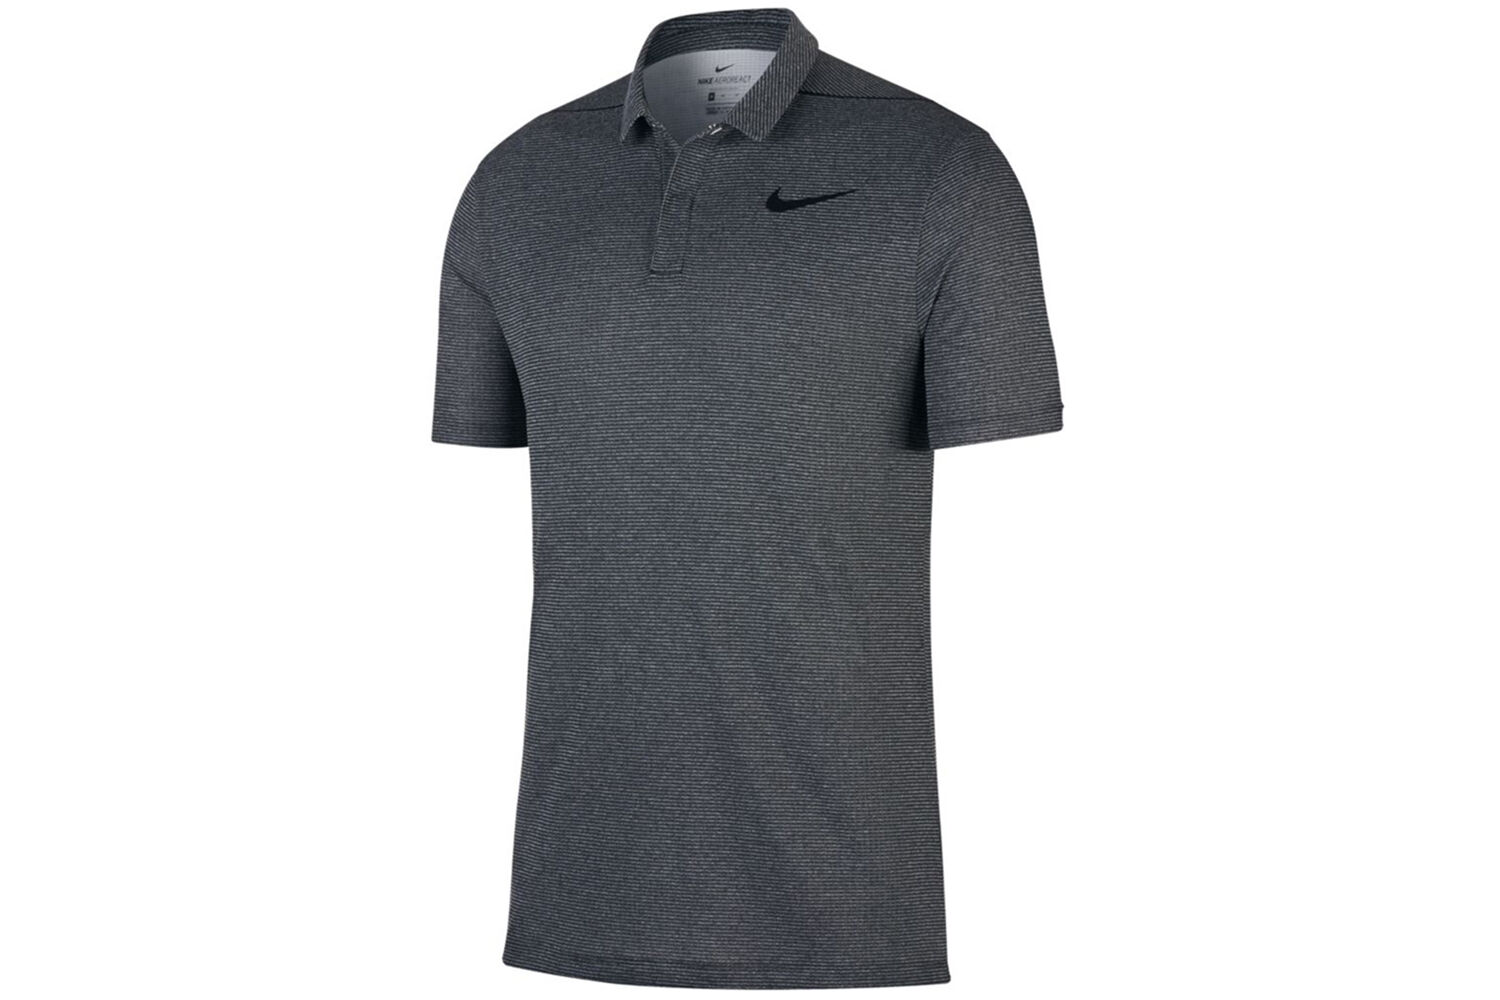 polo nike donna online